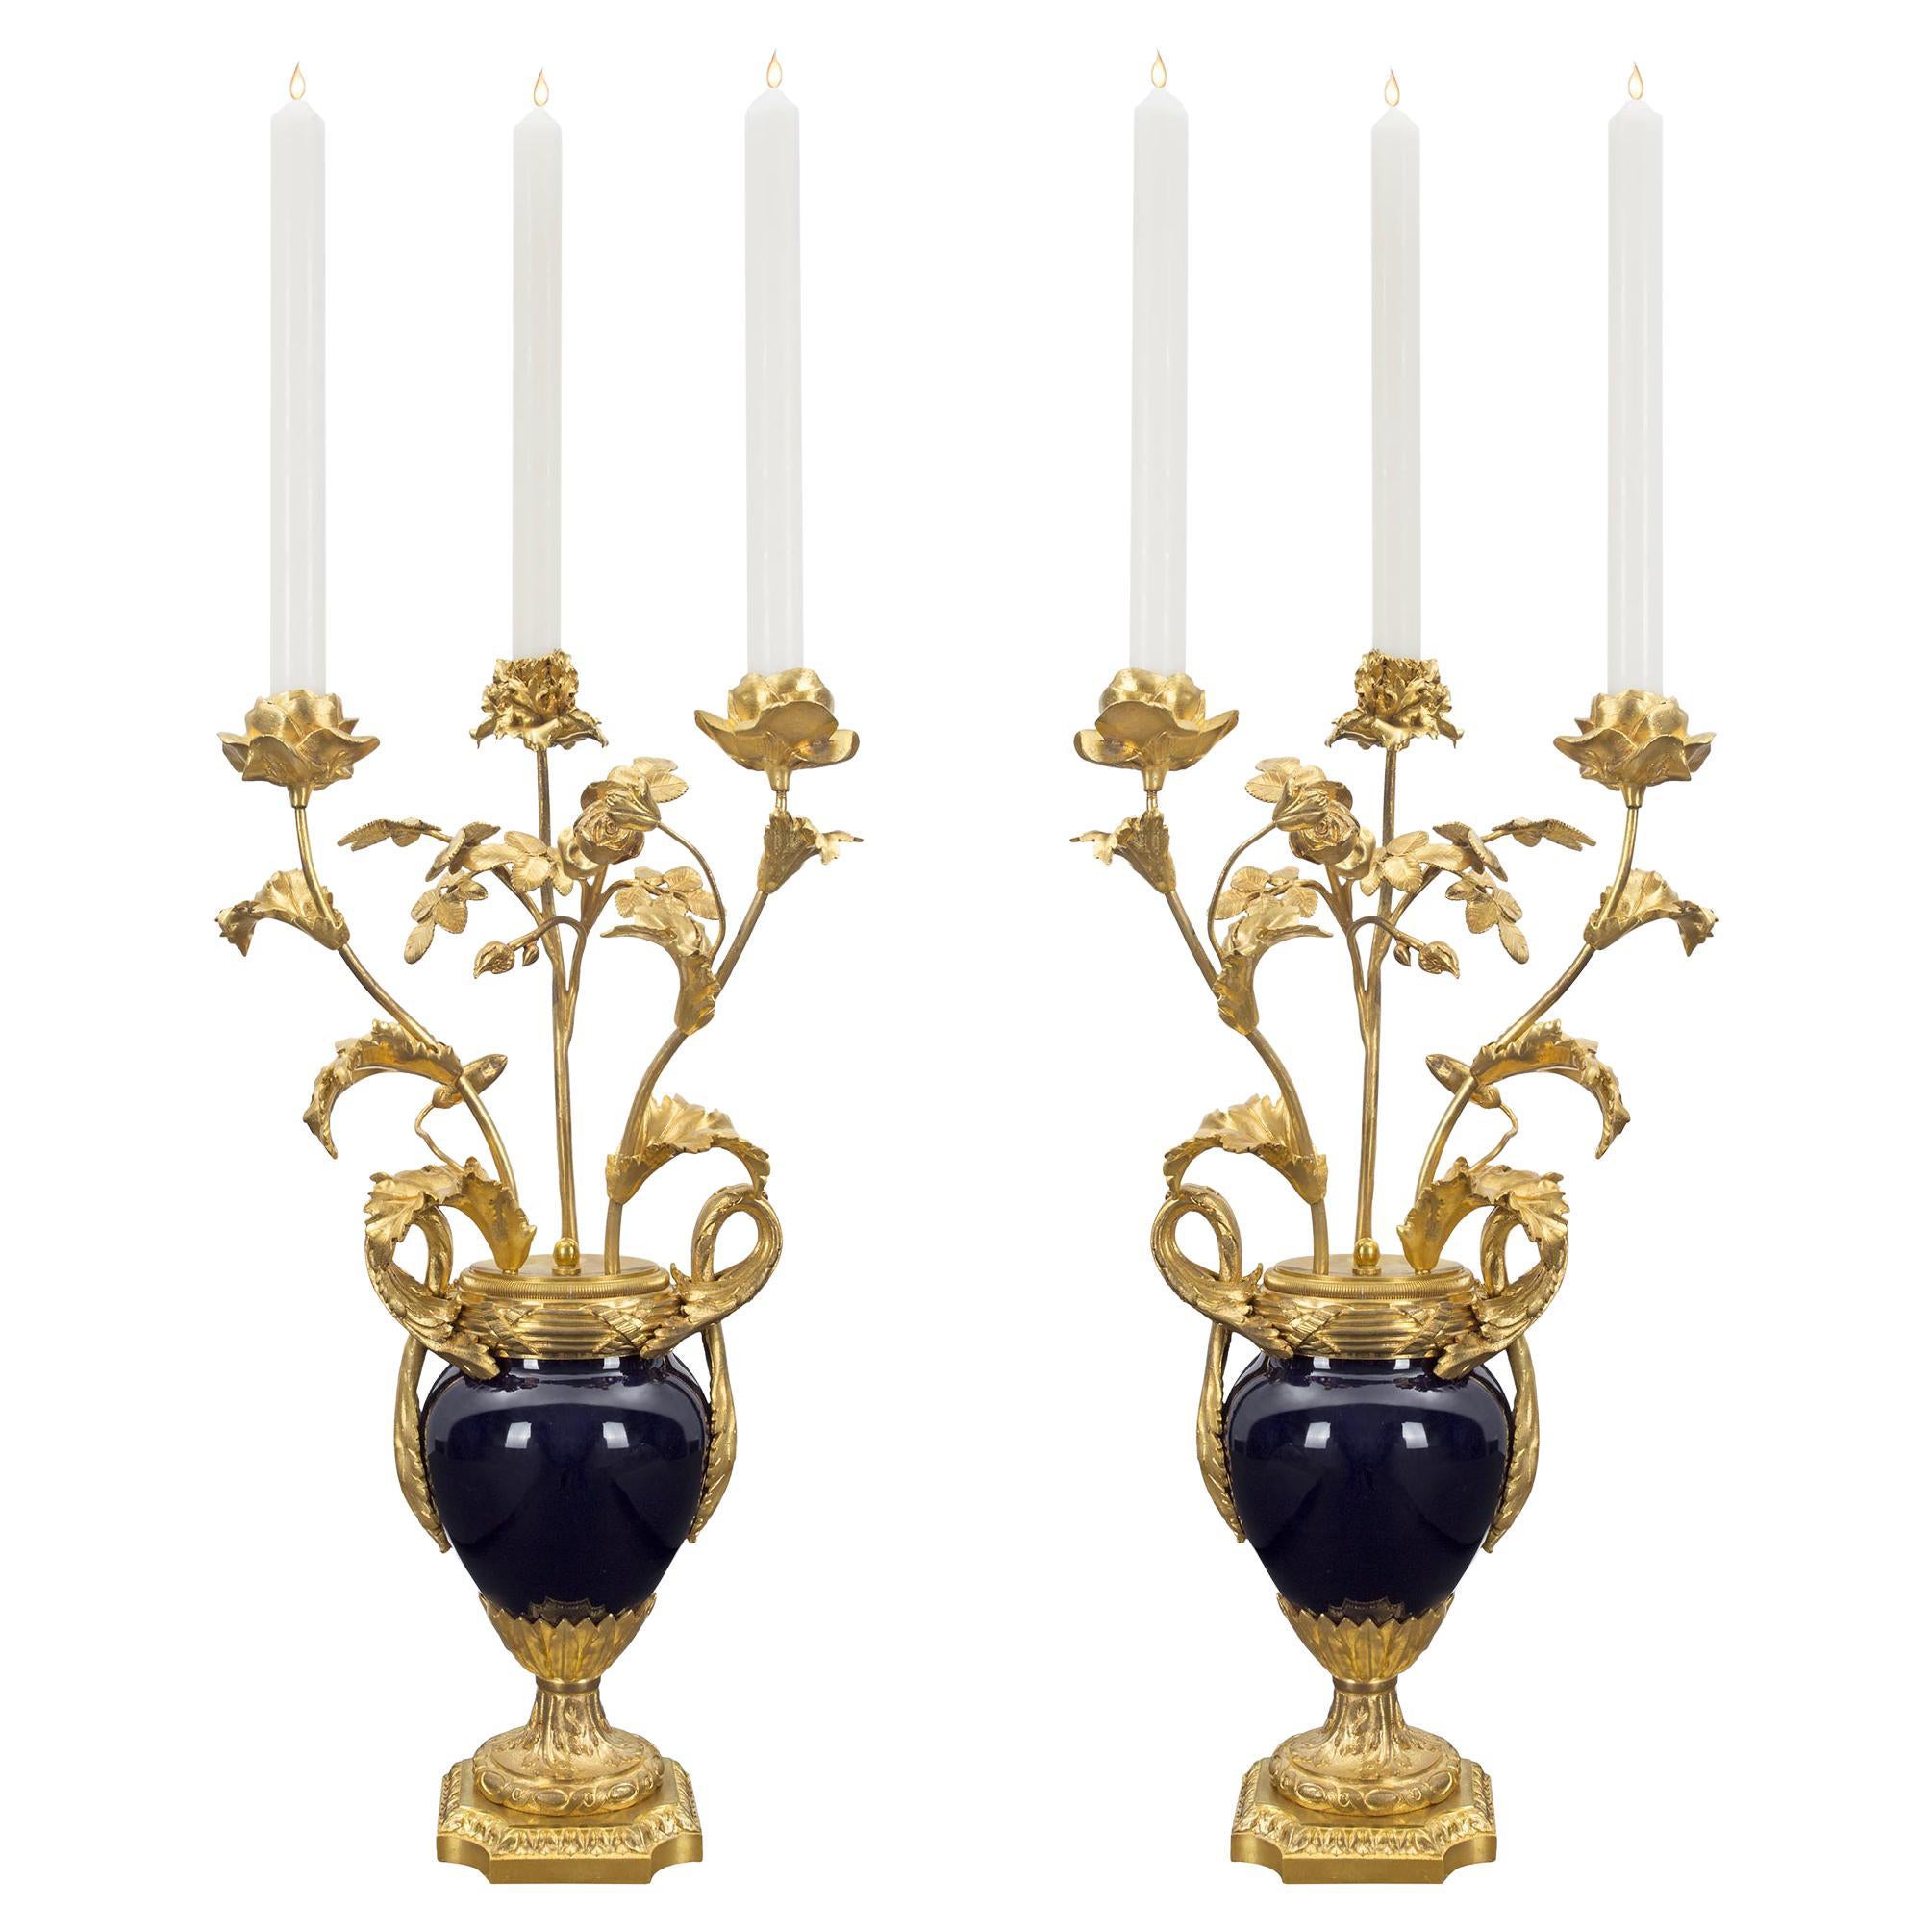 Pair of French 19th Century Louis XVI Style Sèvres Porcelain Candelabras For Sale